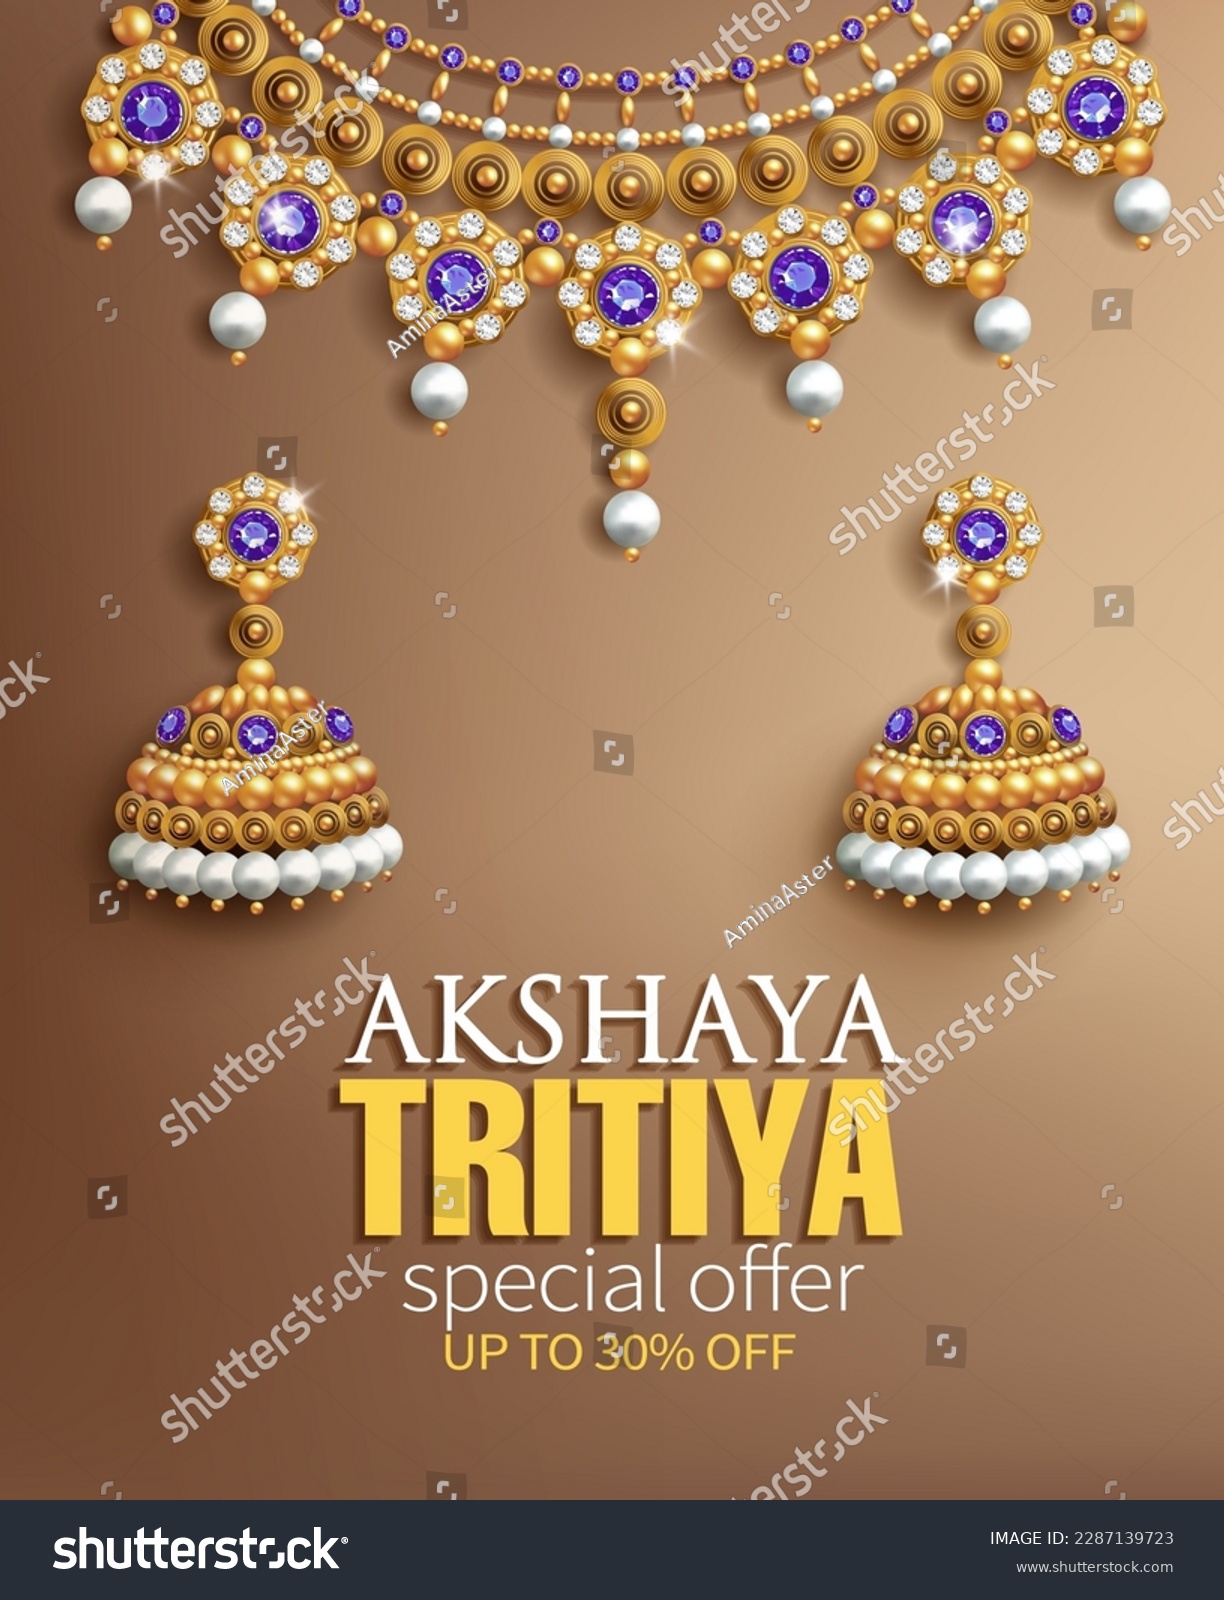 SVG of Promotion banner for Indian festival Akshya Tritiya. Gorgeous gold necklace and earrings with pearls, blue gems and diamonds on silk background. Vector illustration. svg